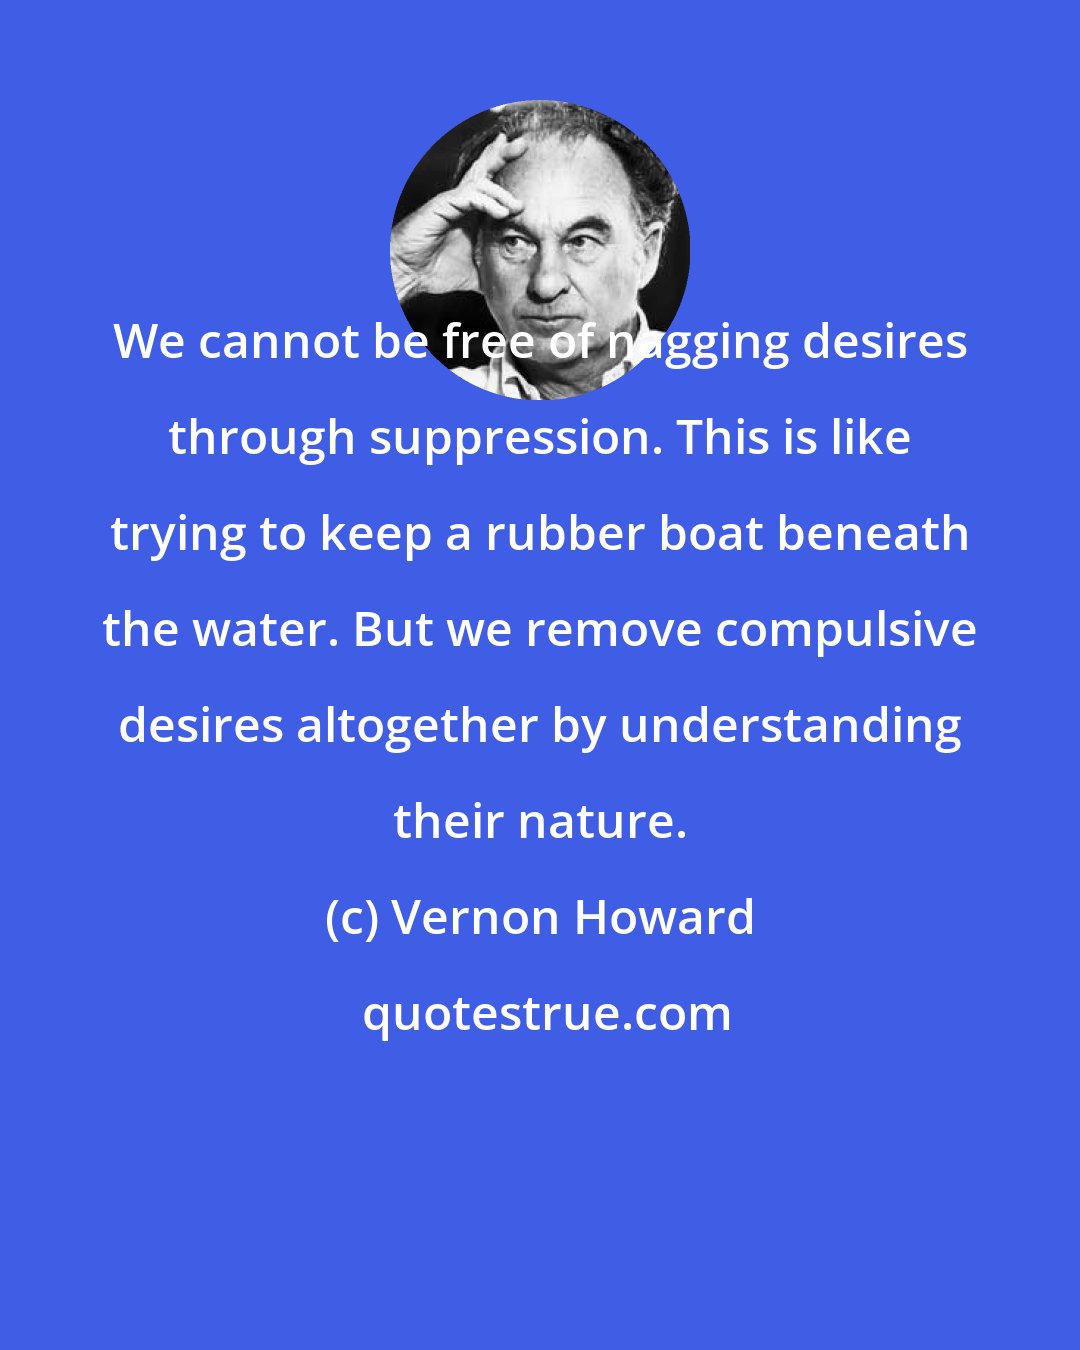 Vernon Howard: We cannot be free of nagging desires through suppression. This is like trying to keep a rubber boat beneath the water. But we remove compulsive desires altogether by understanding their nature.